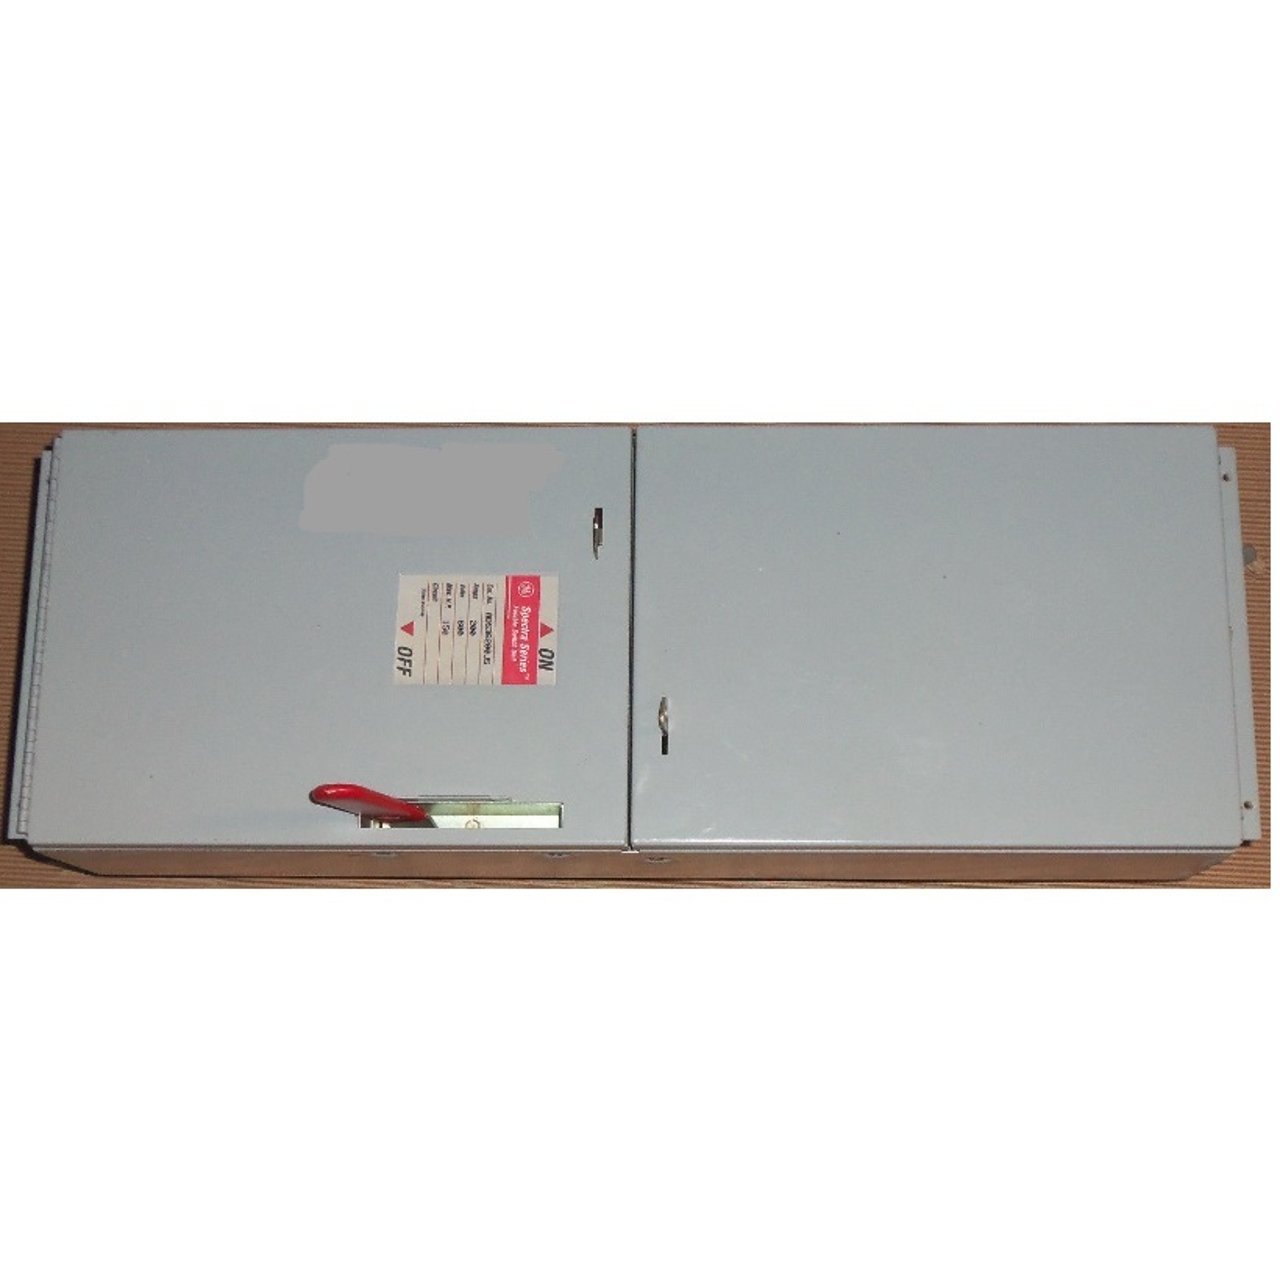 ADS36100HSFP - General Electrics - Panel Switch